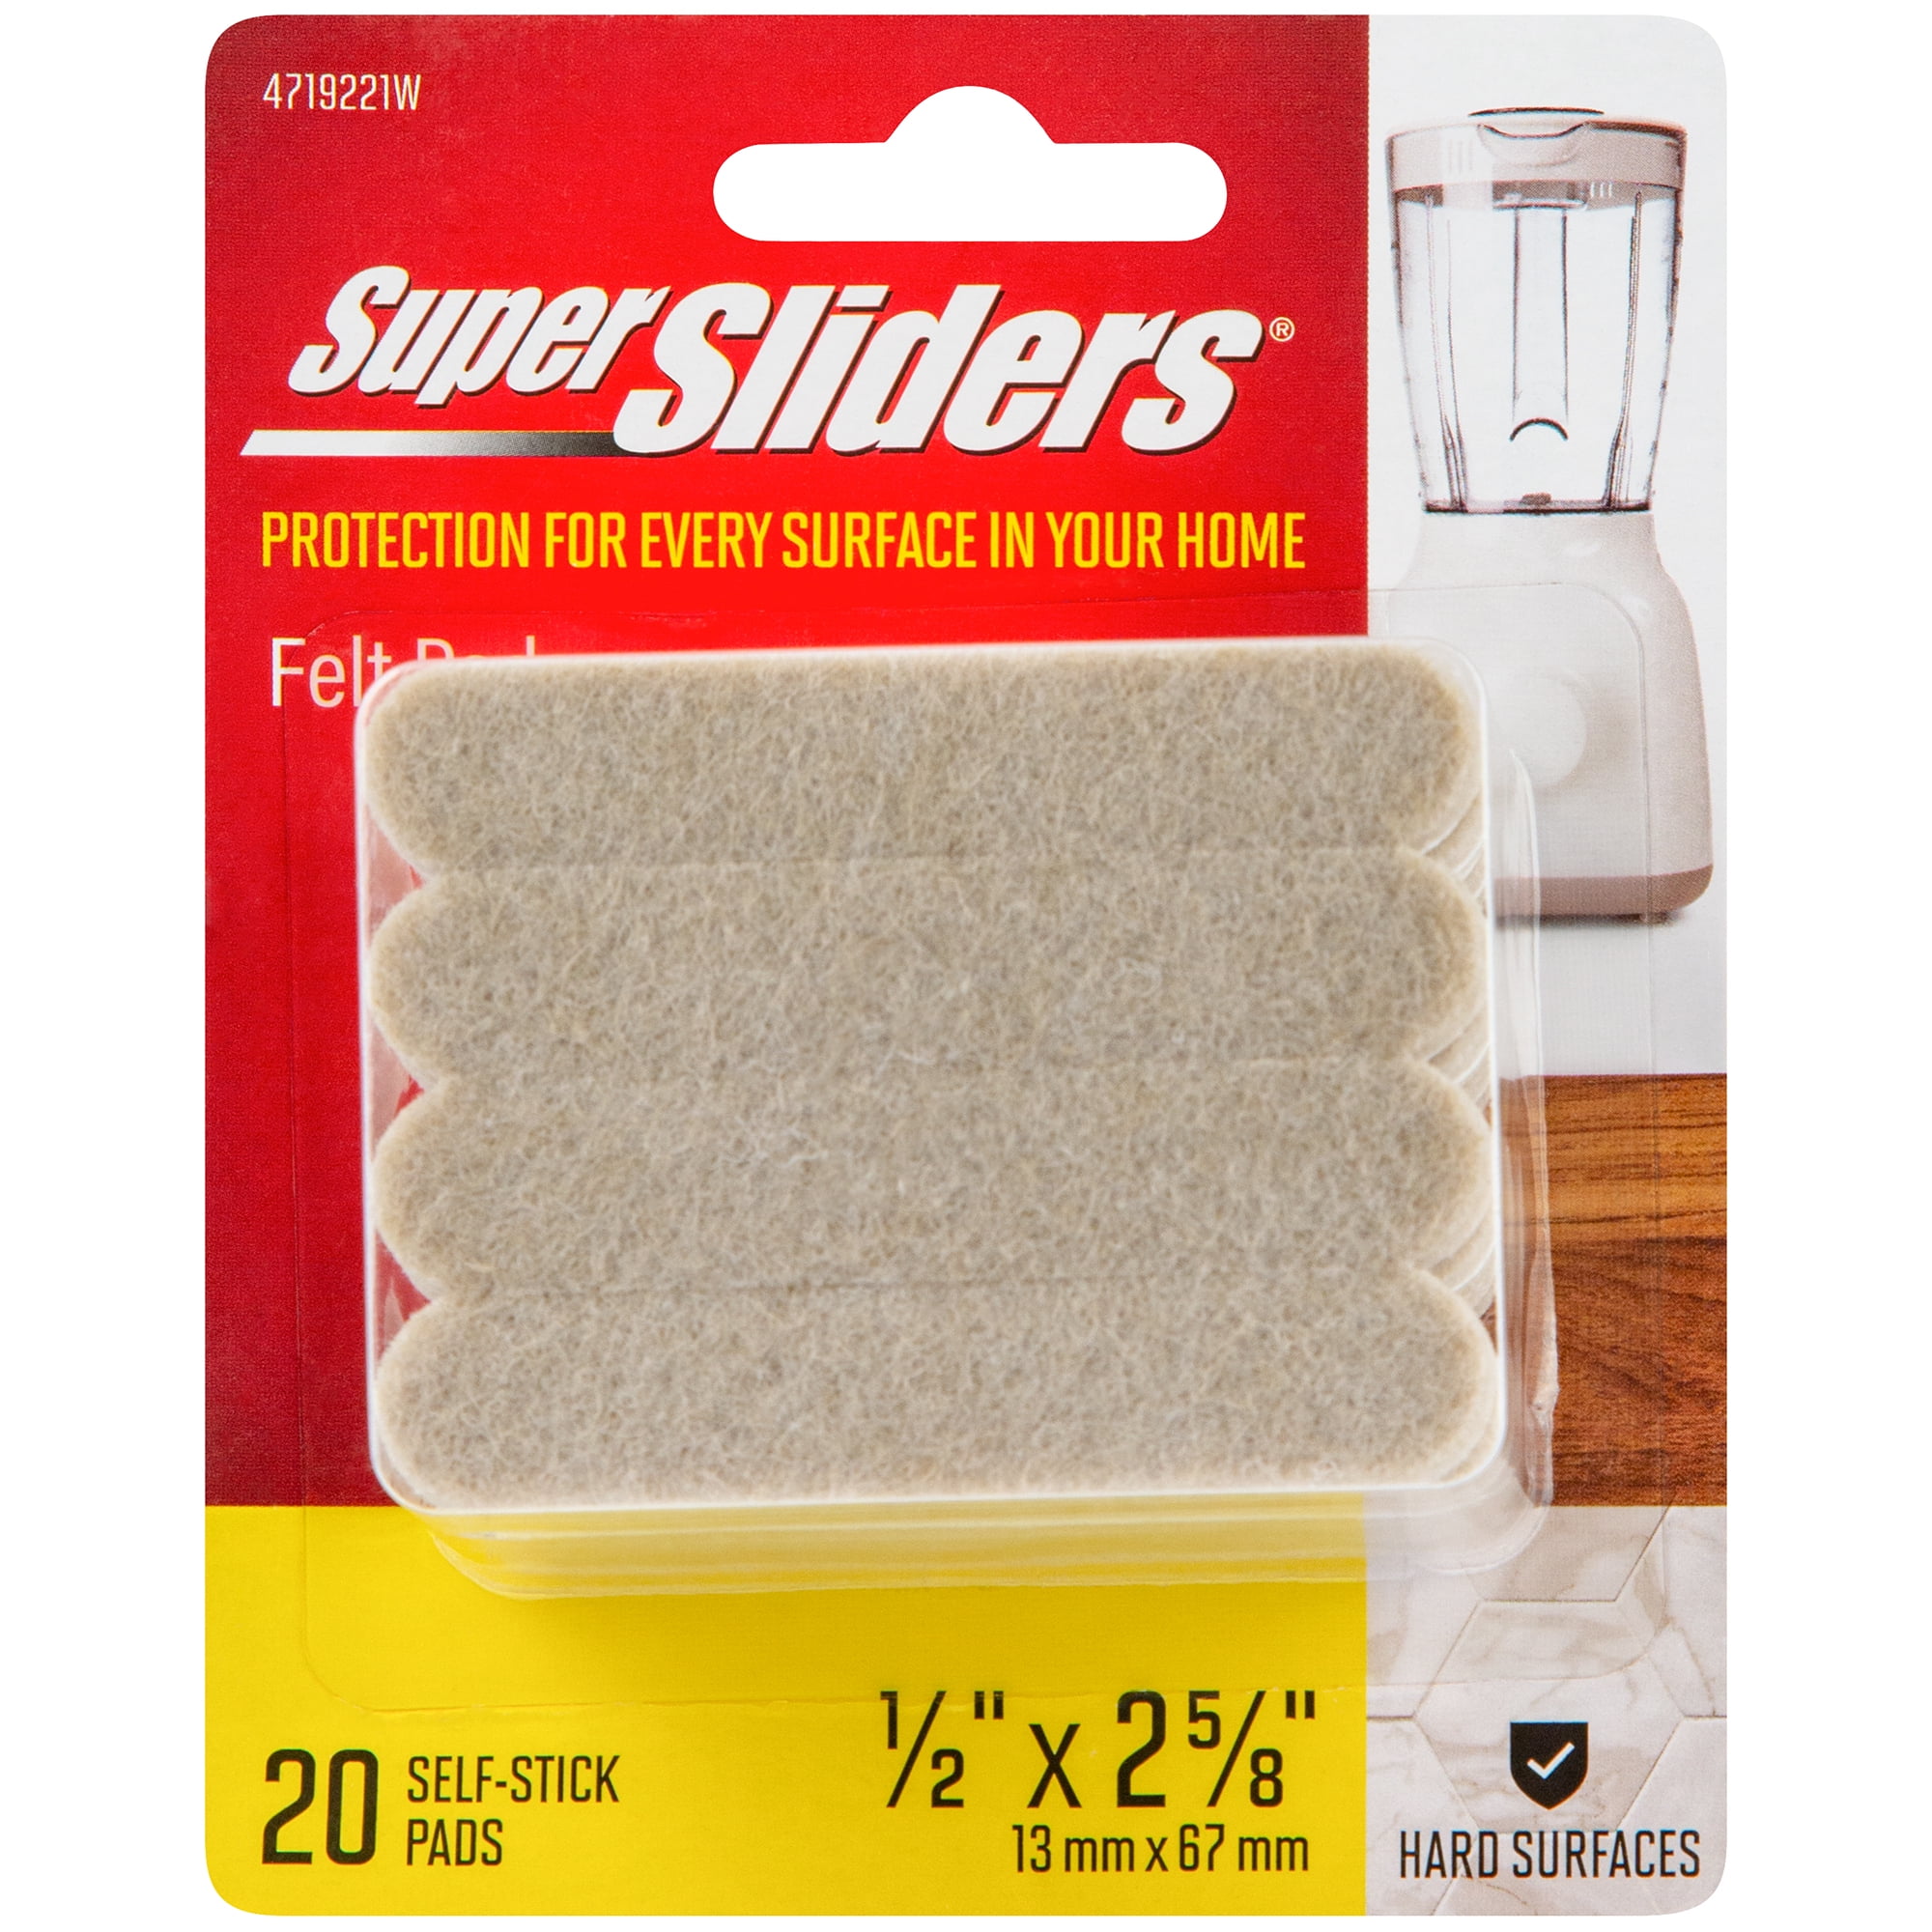 EZ Glide 3-1/2" x 5/8" Sand Strip Surface Protectors Home Floor Adhesive Scratch 